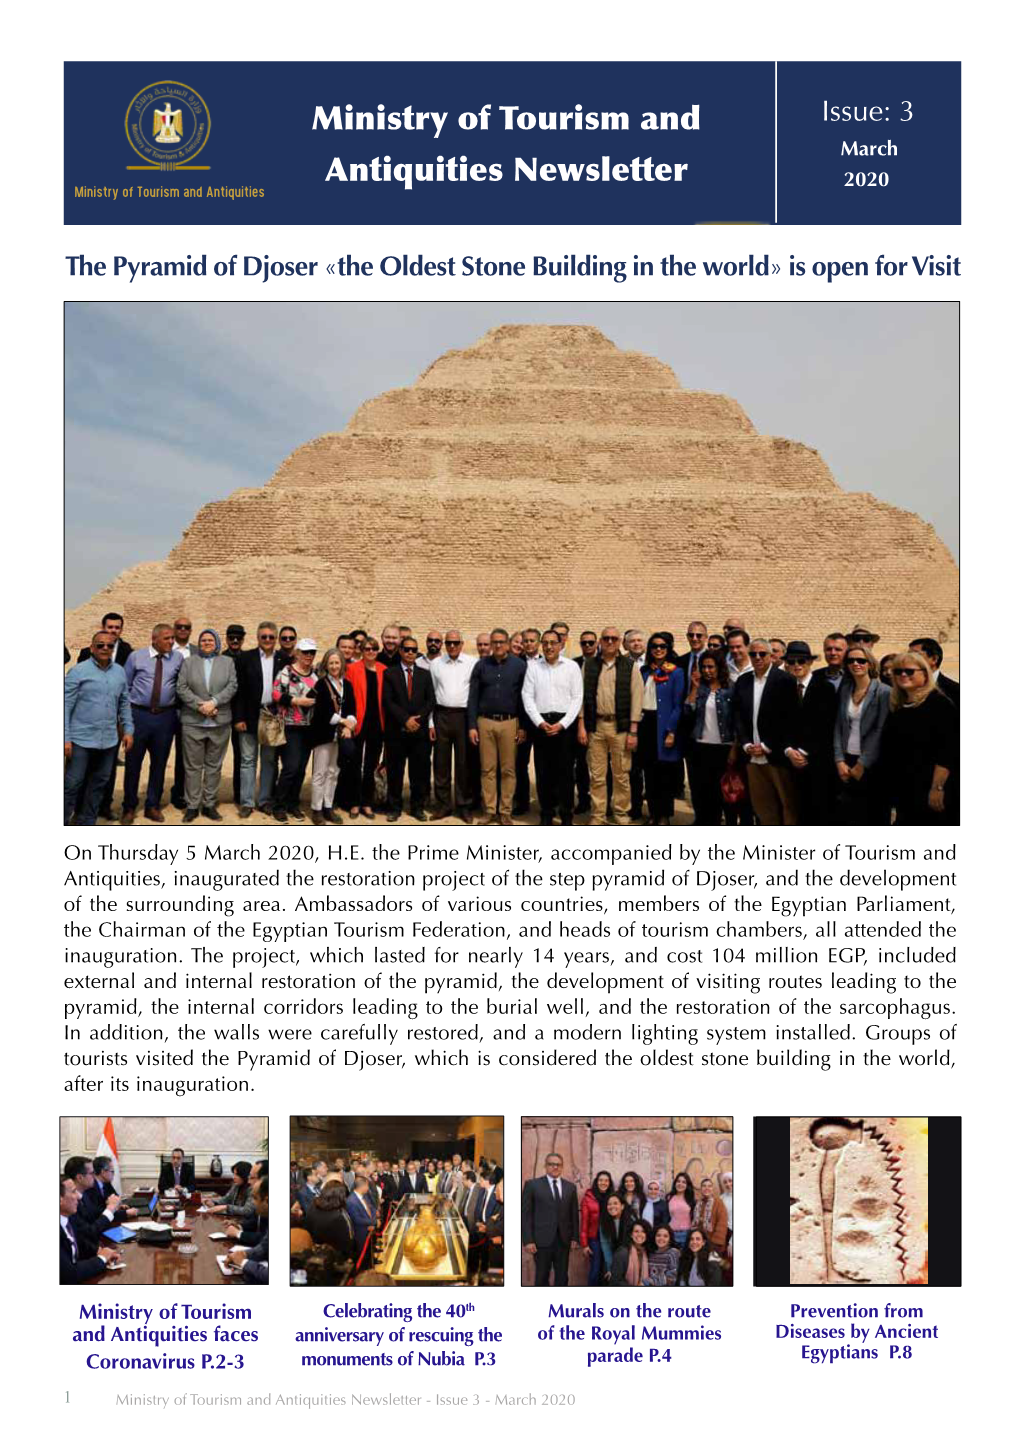 Ministry of Tourism and Antiquities Newsletter